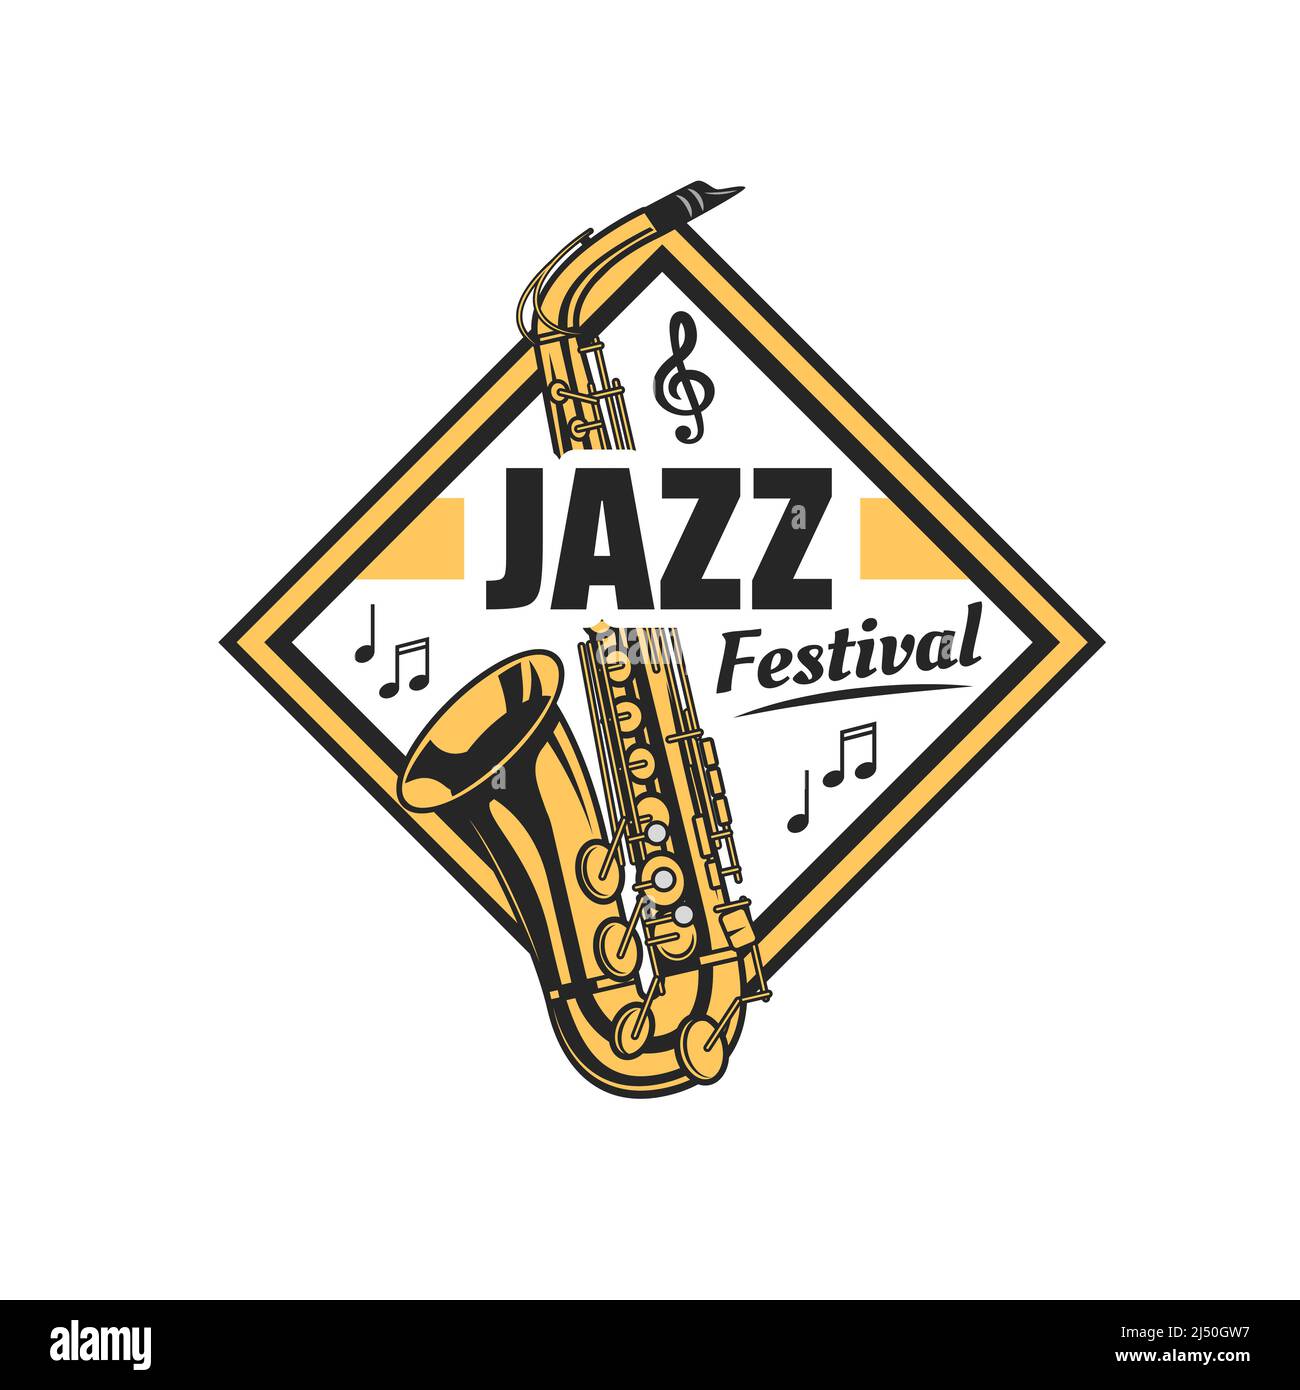 Jazz festival icon with saxophone, music notes and treble clef. Sax, vector brass musical instrument and notation symbols isolated badge of jazz fest concert, live music party, blues show or event Stock Vector